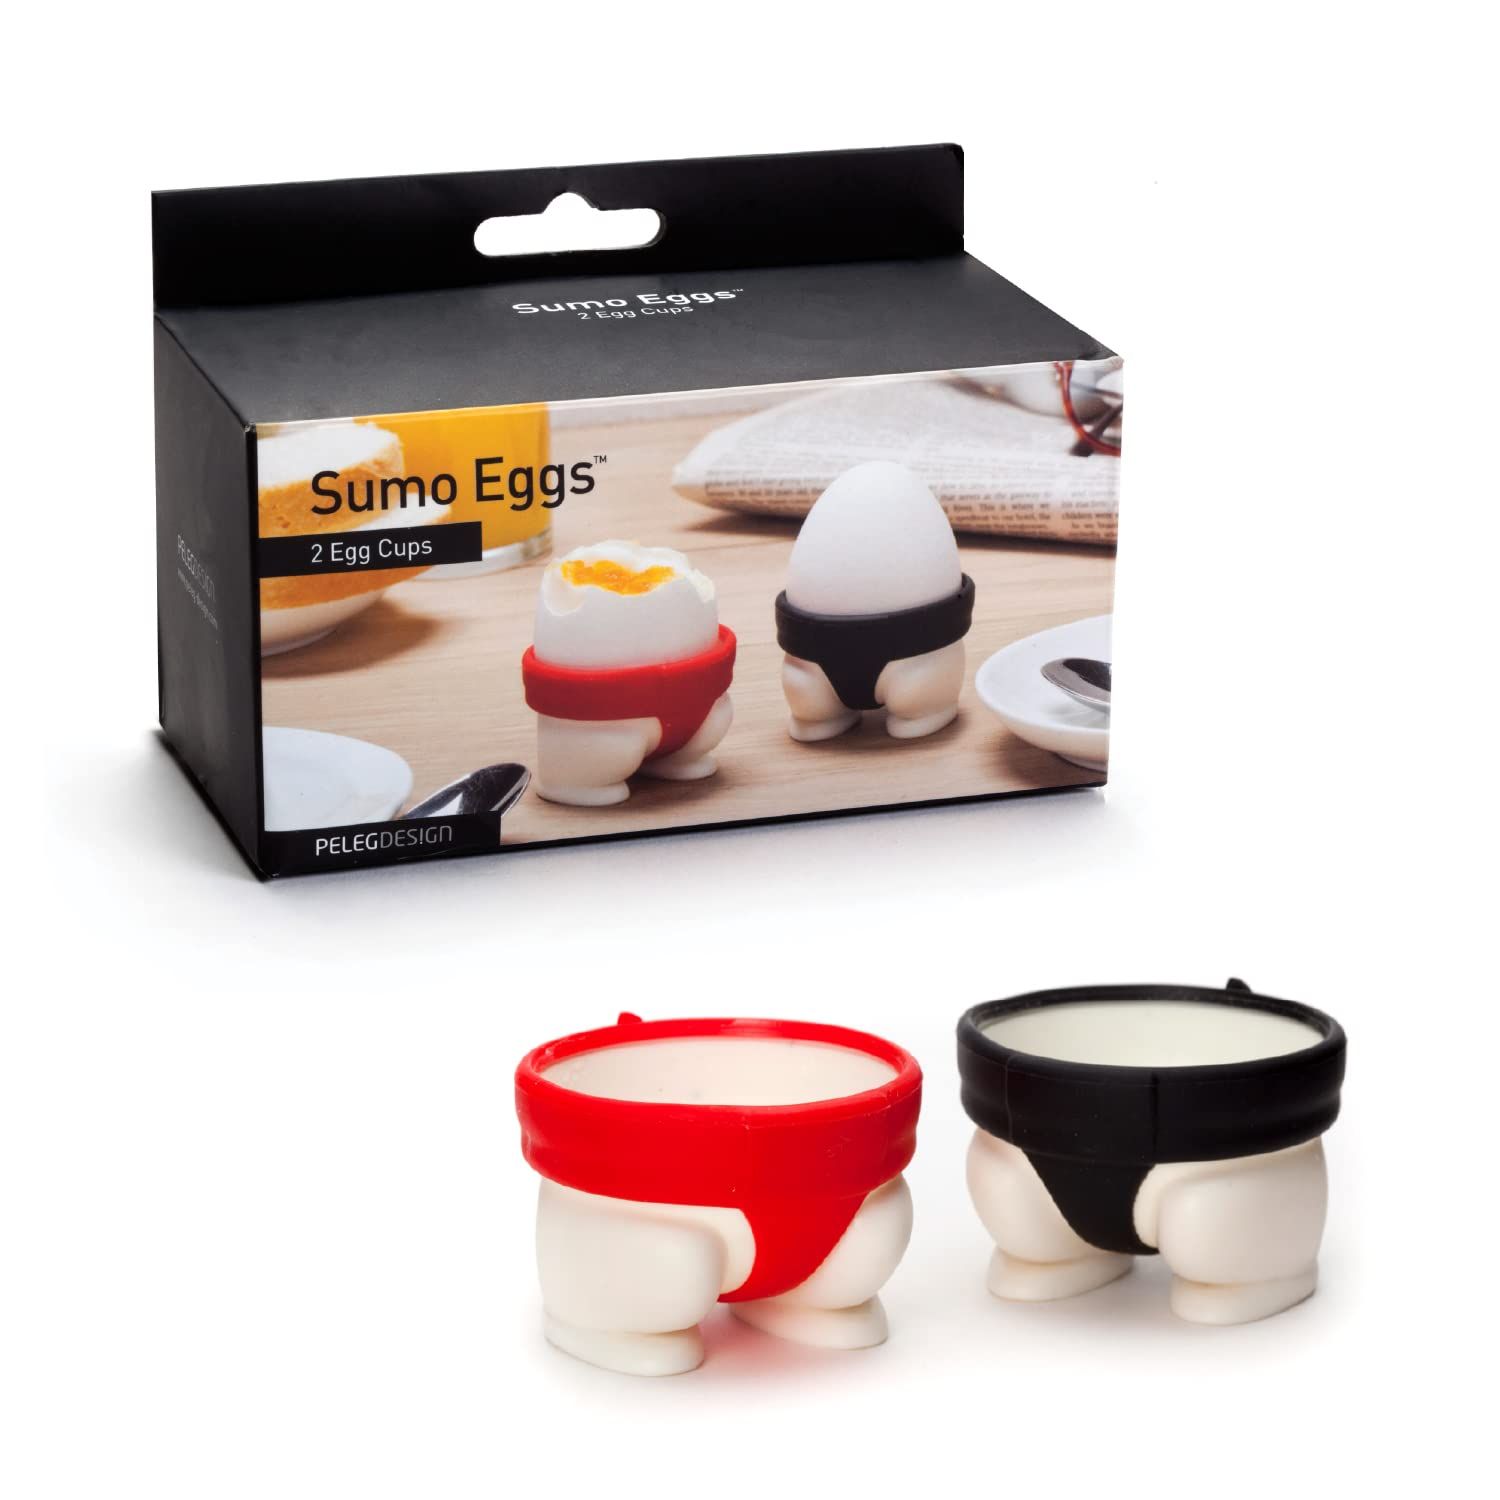 Sumo Eggs - Soft or Hard Boiled Egg Cup Holders (Set of 2) Sumo Design - Utensil Kitchen Decor by Pe | Amazon (US)